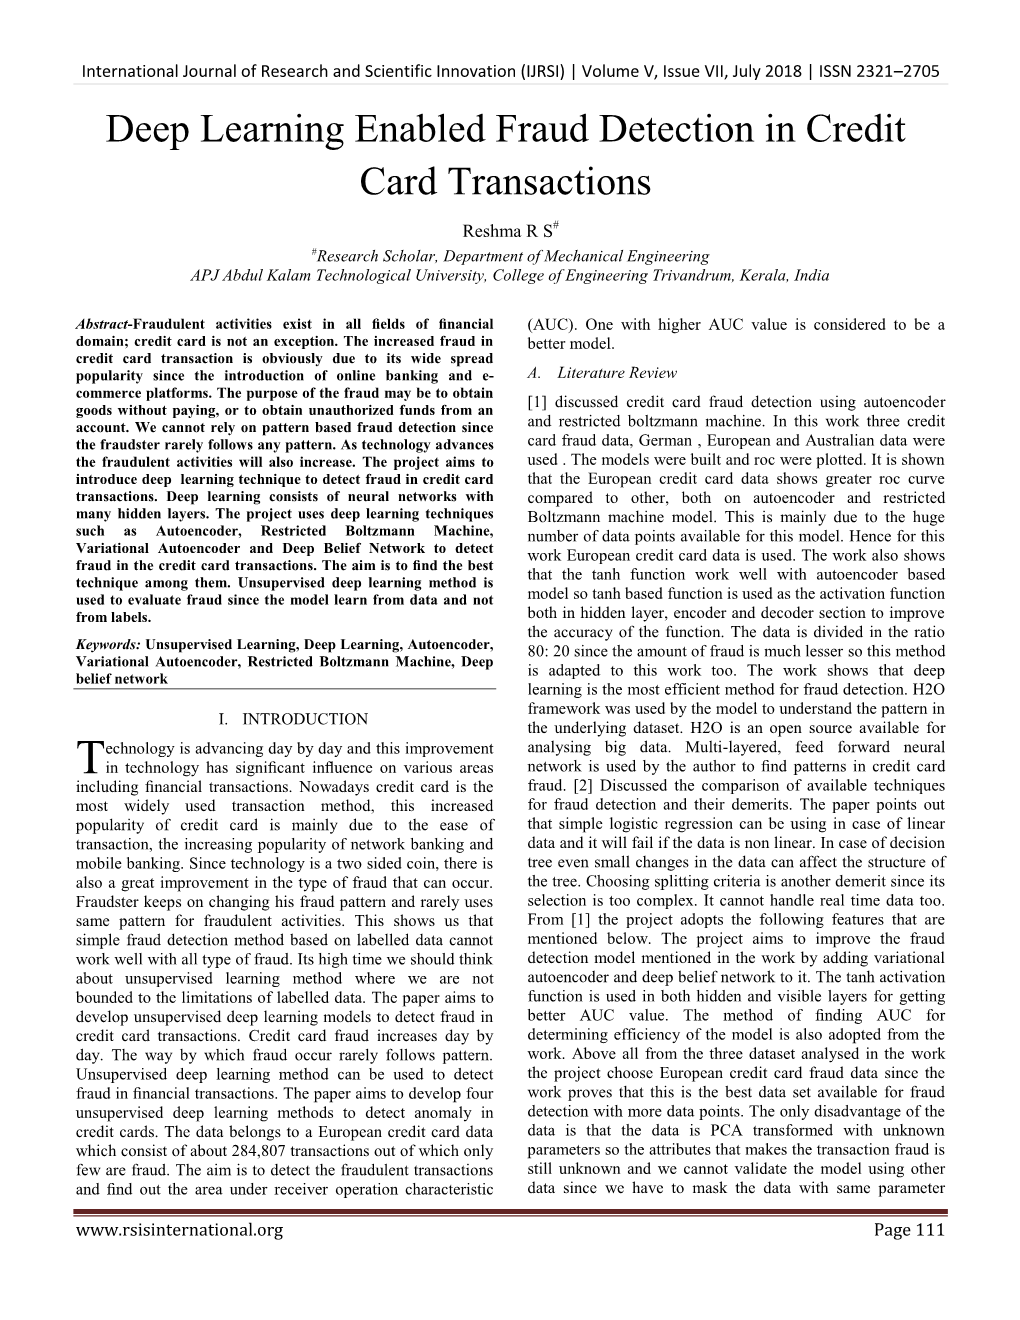 Deep Learning Enabled Fraud Detection in Credit Card Transactions